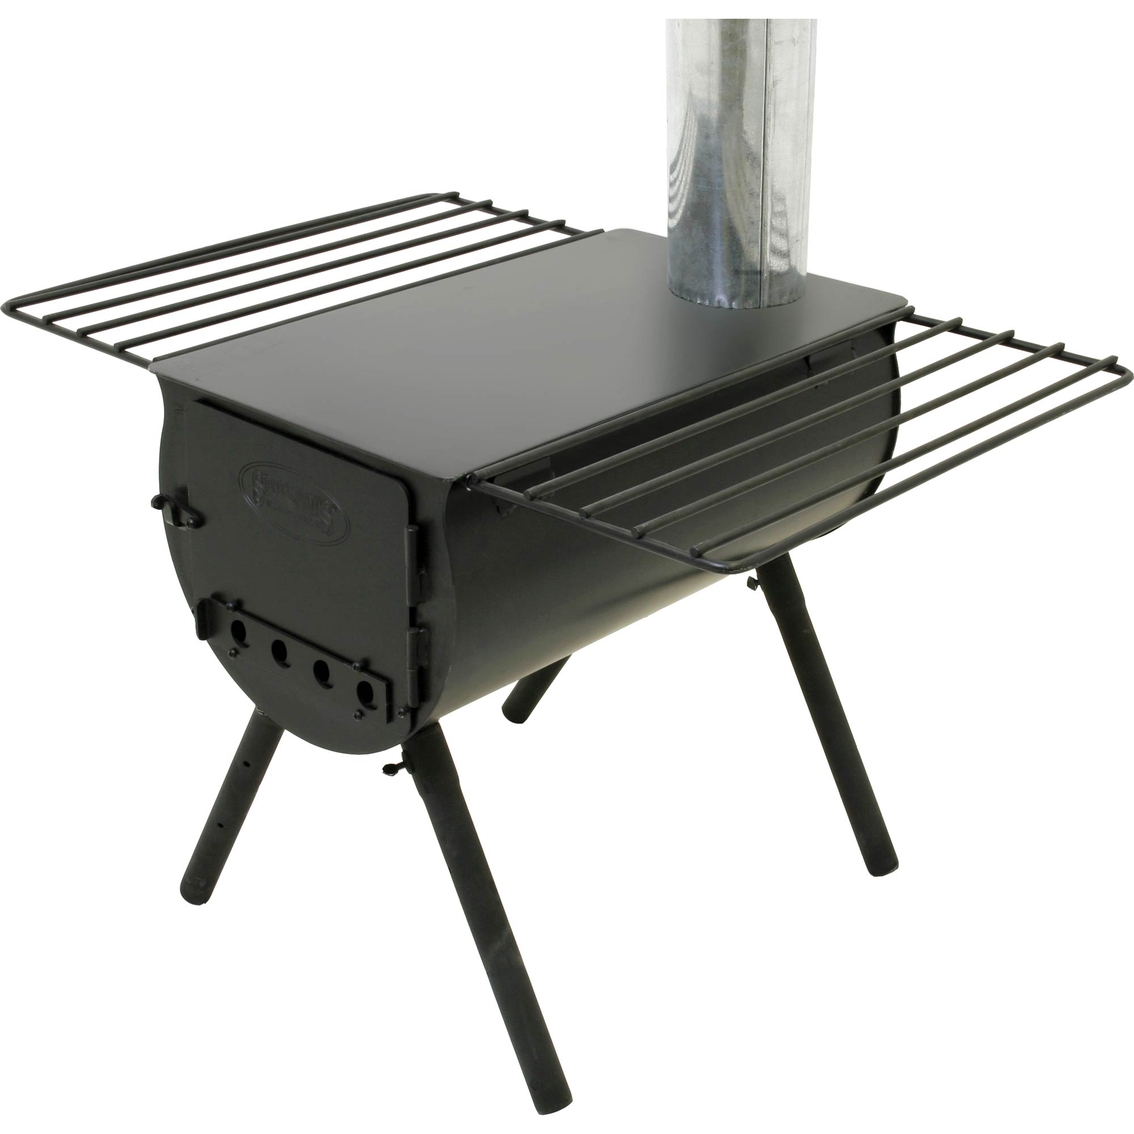 Camp Chef Alpine Heavy Duty Cylinder Stove - Image 1 of 4